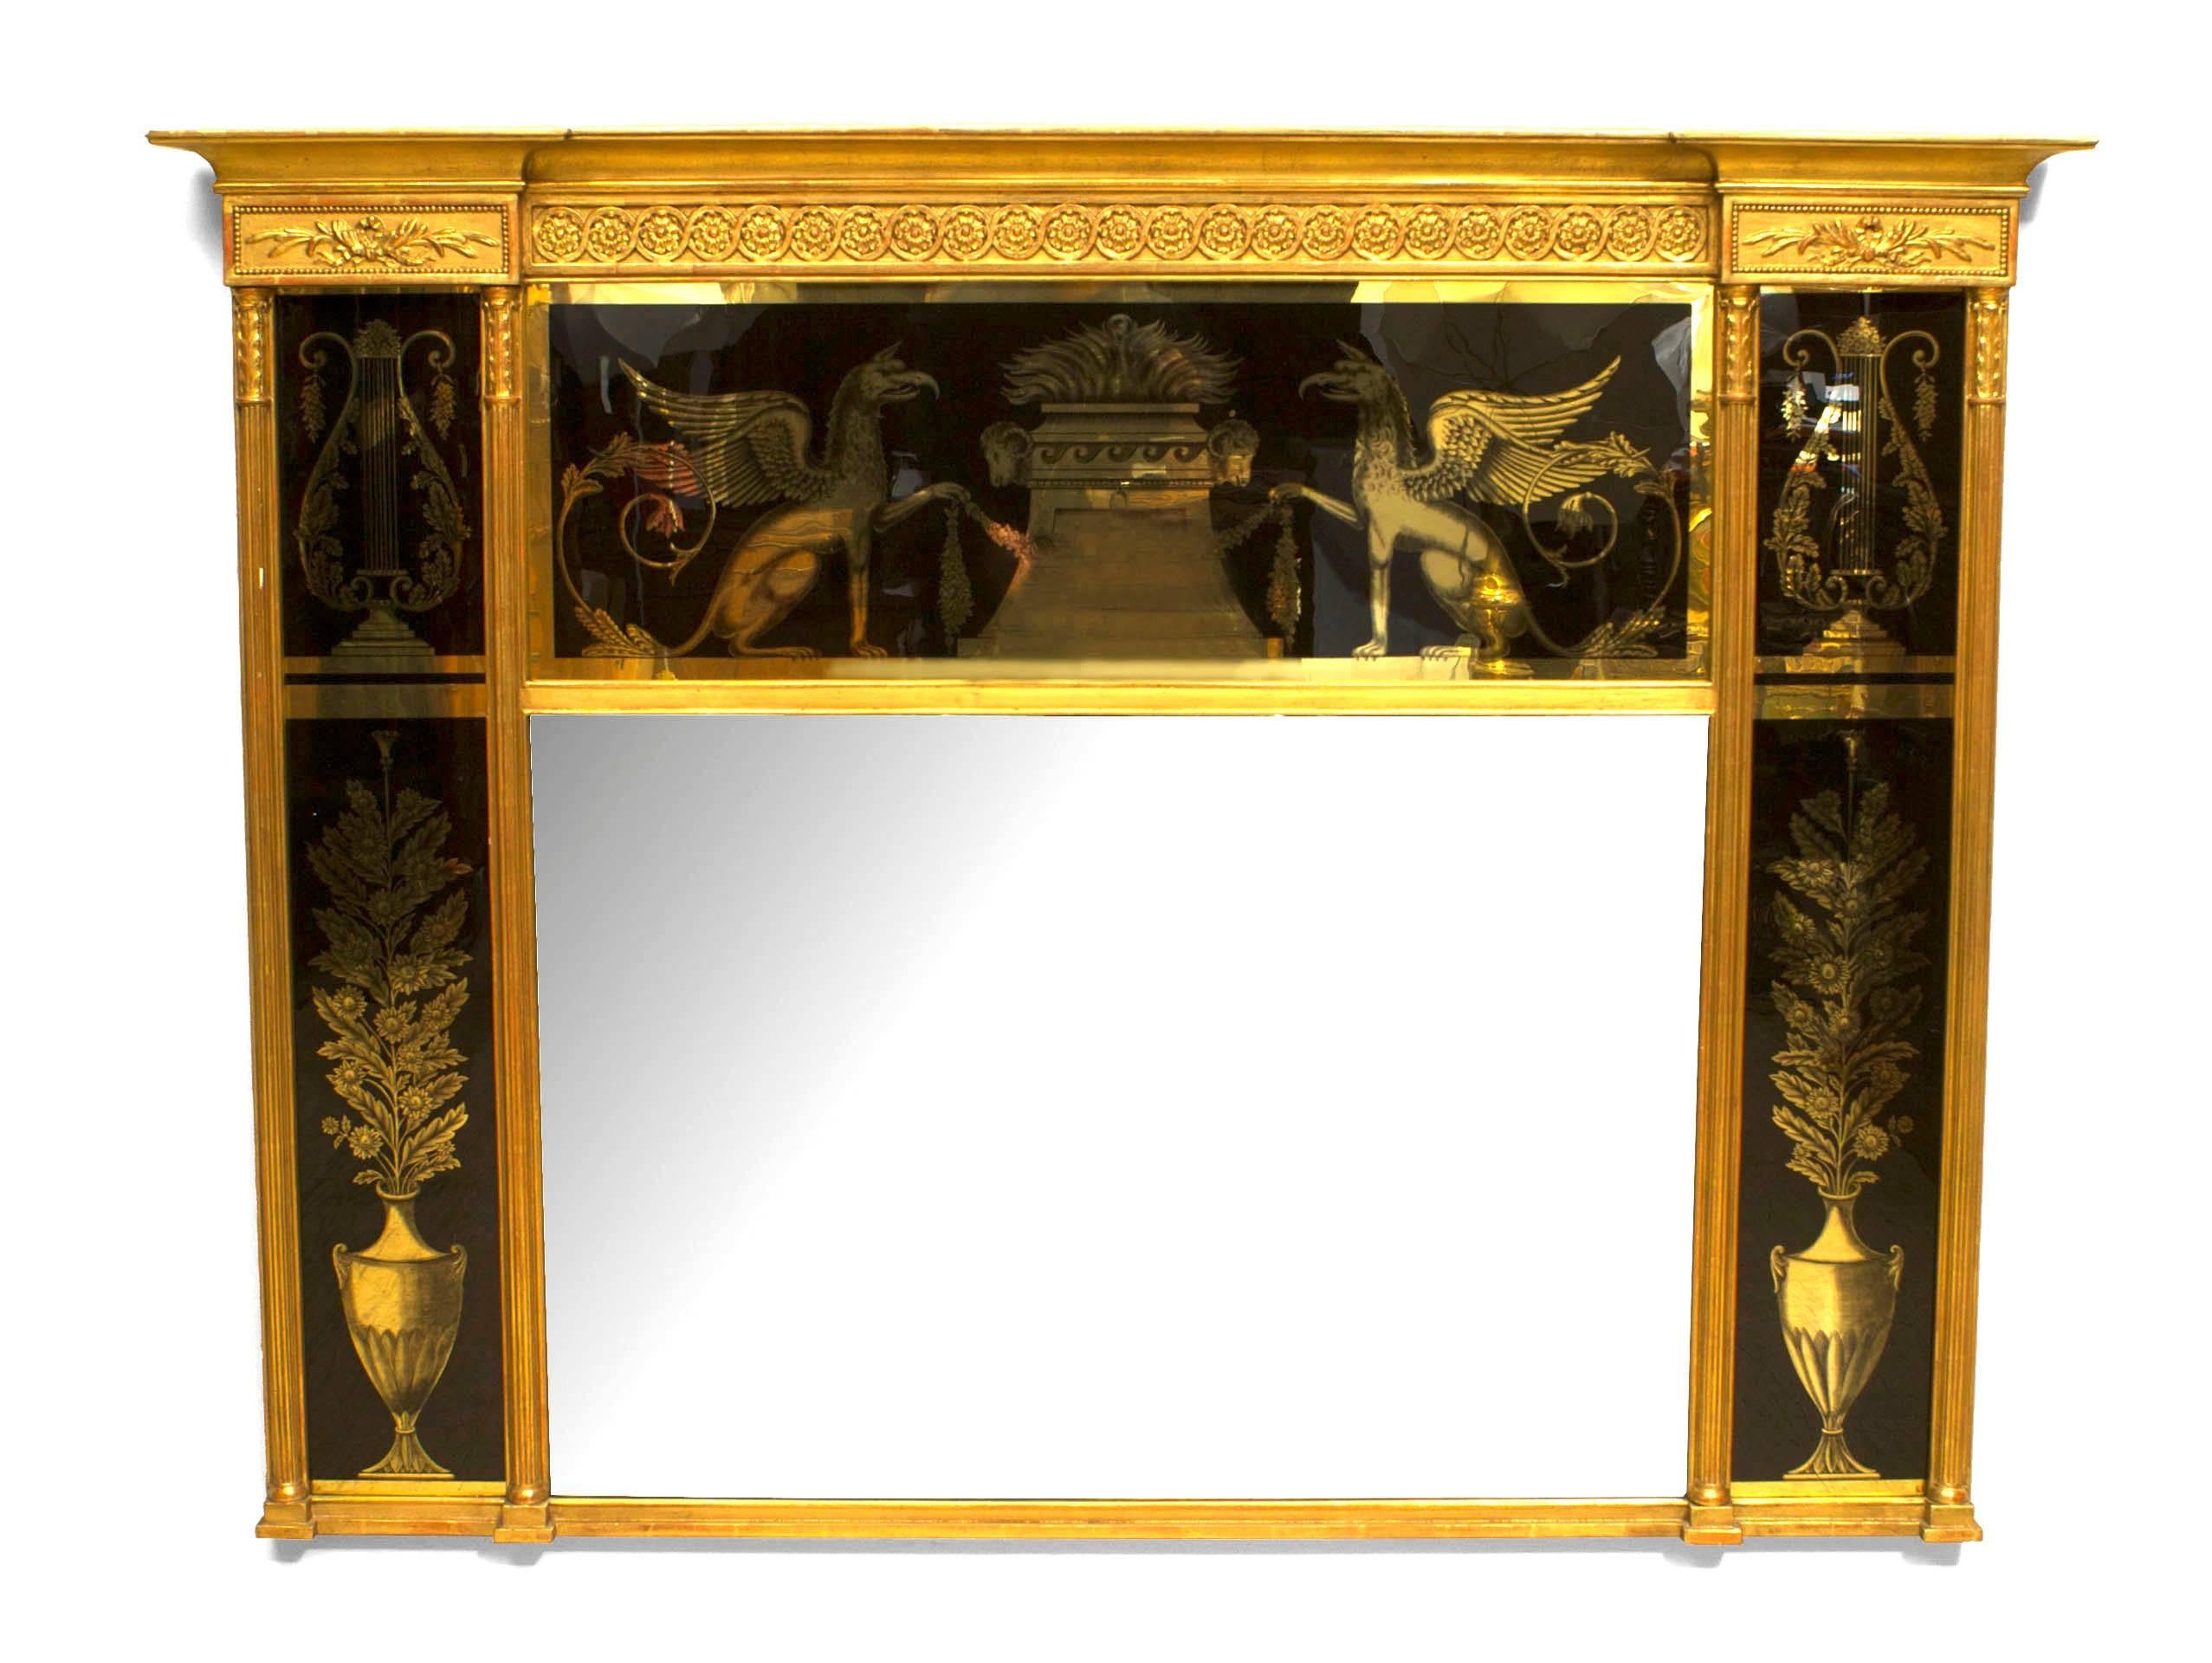 Italian Neoclassic-style (19th Century) carved giltwood wall mirror with black and gold decorated reverse glass panels with urns, griffins, and lyre designs.
